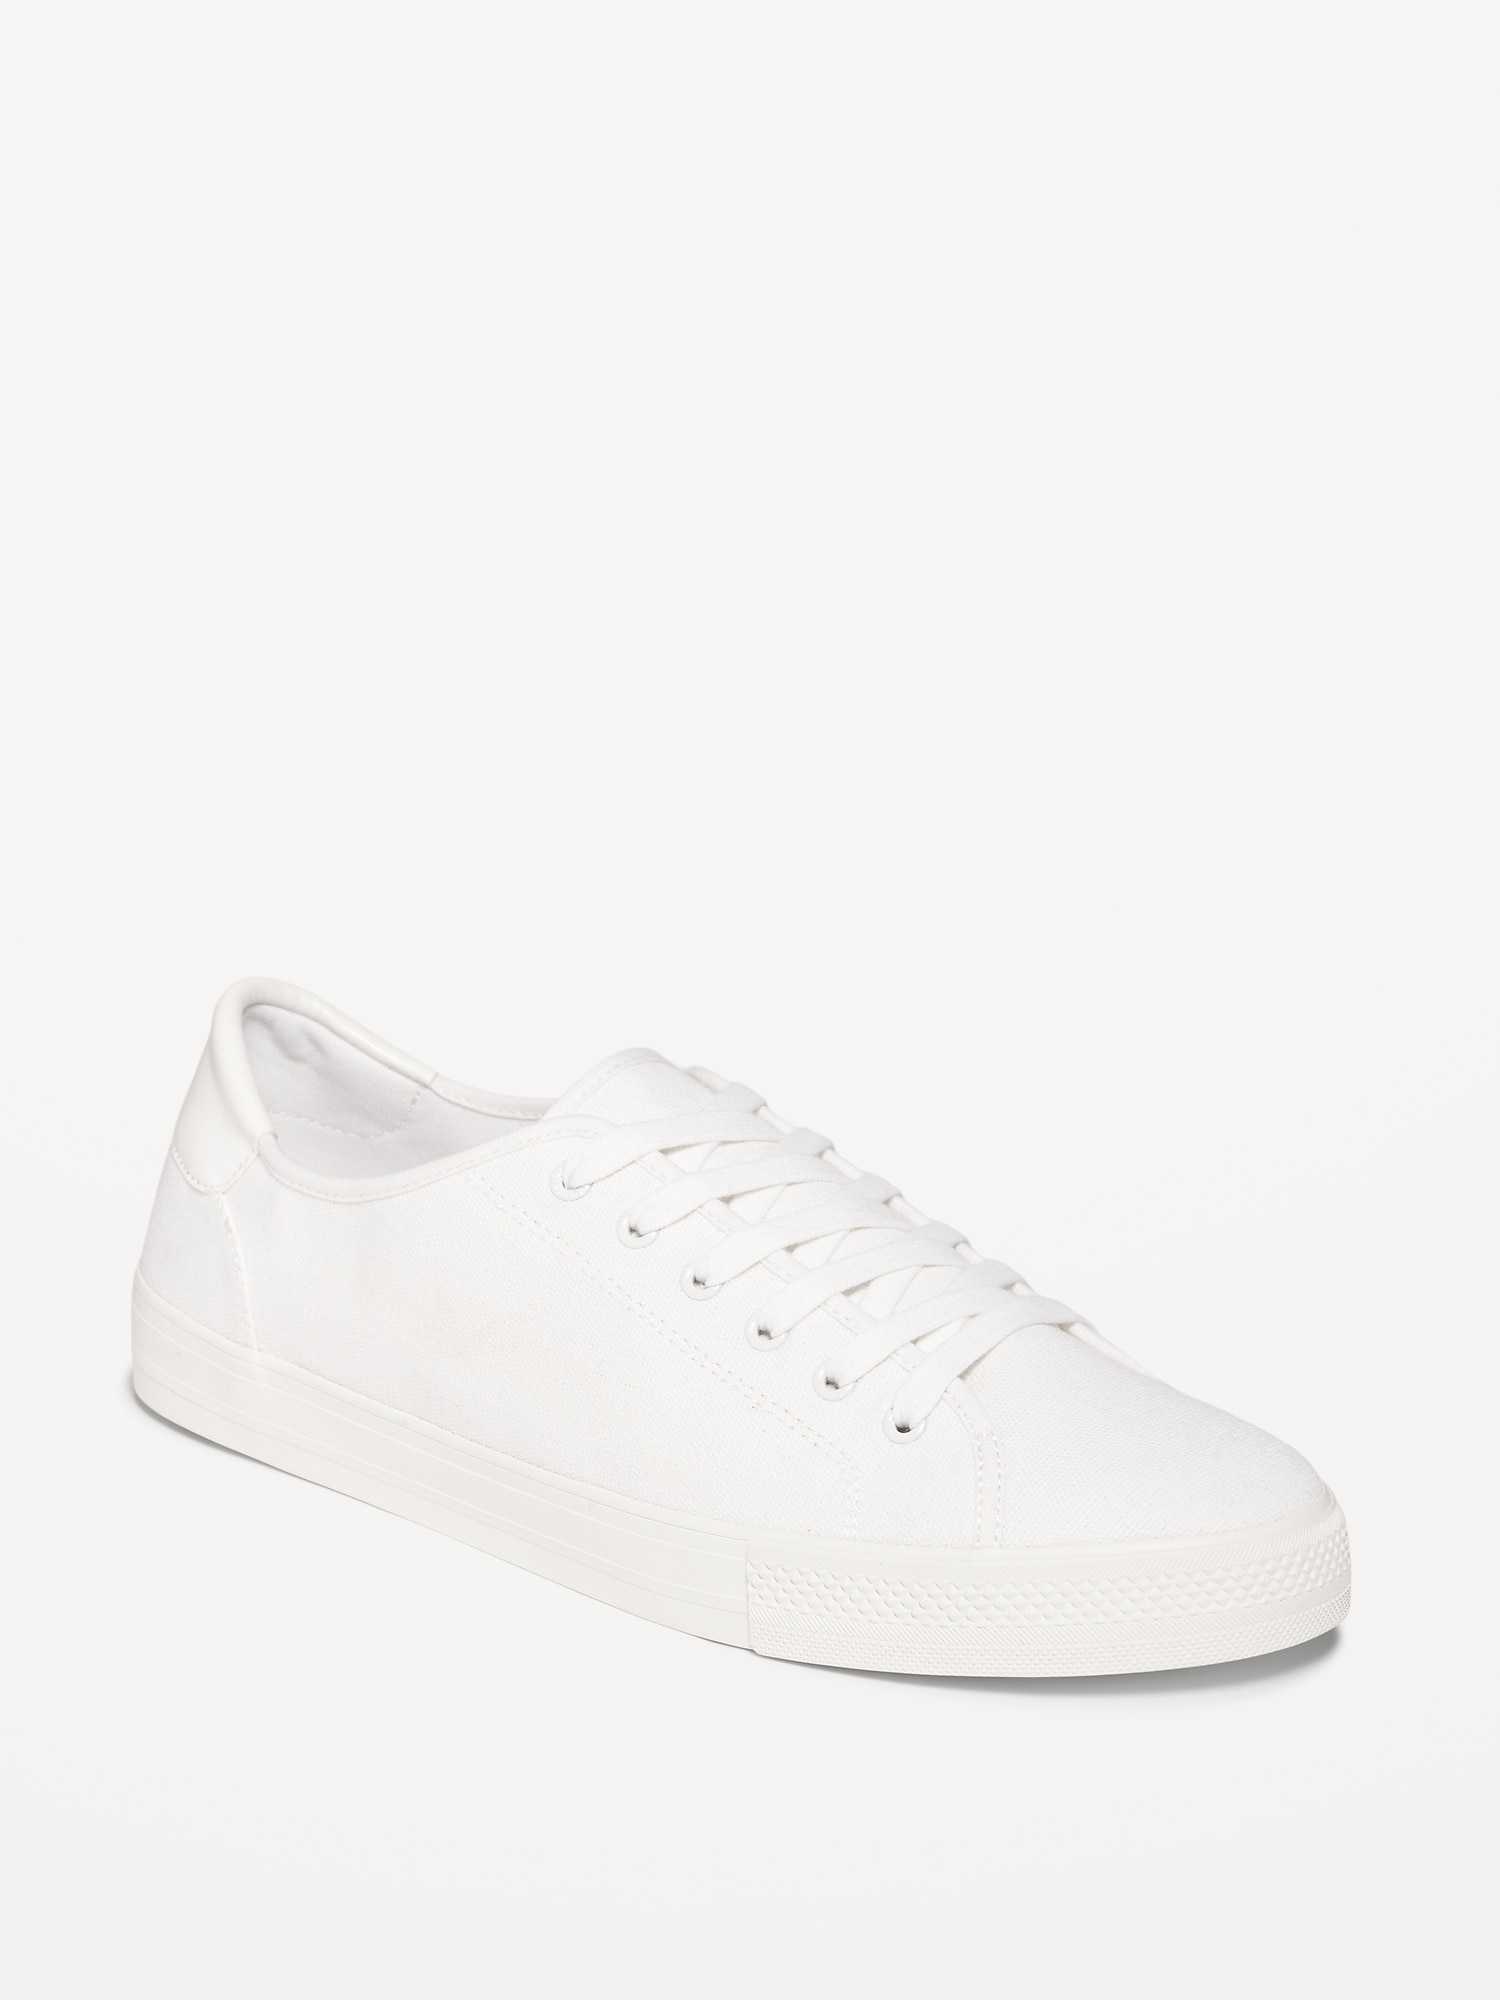 gennemse Ultimate absorption Canvas Lace-Up Sneakers for Men | Old Navy